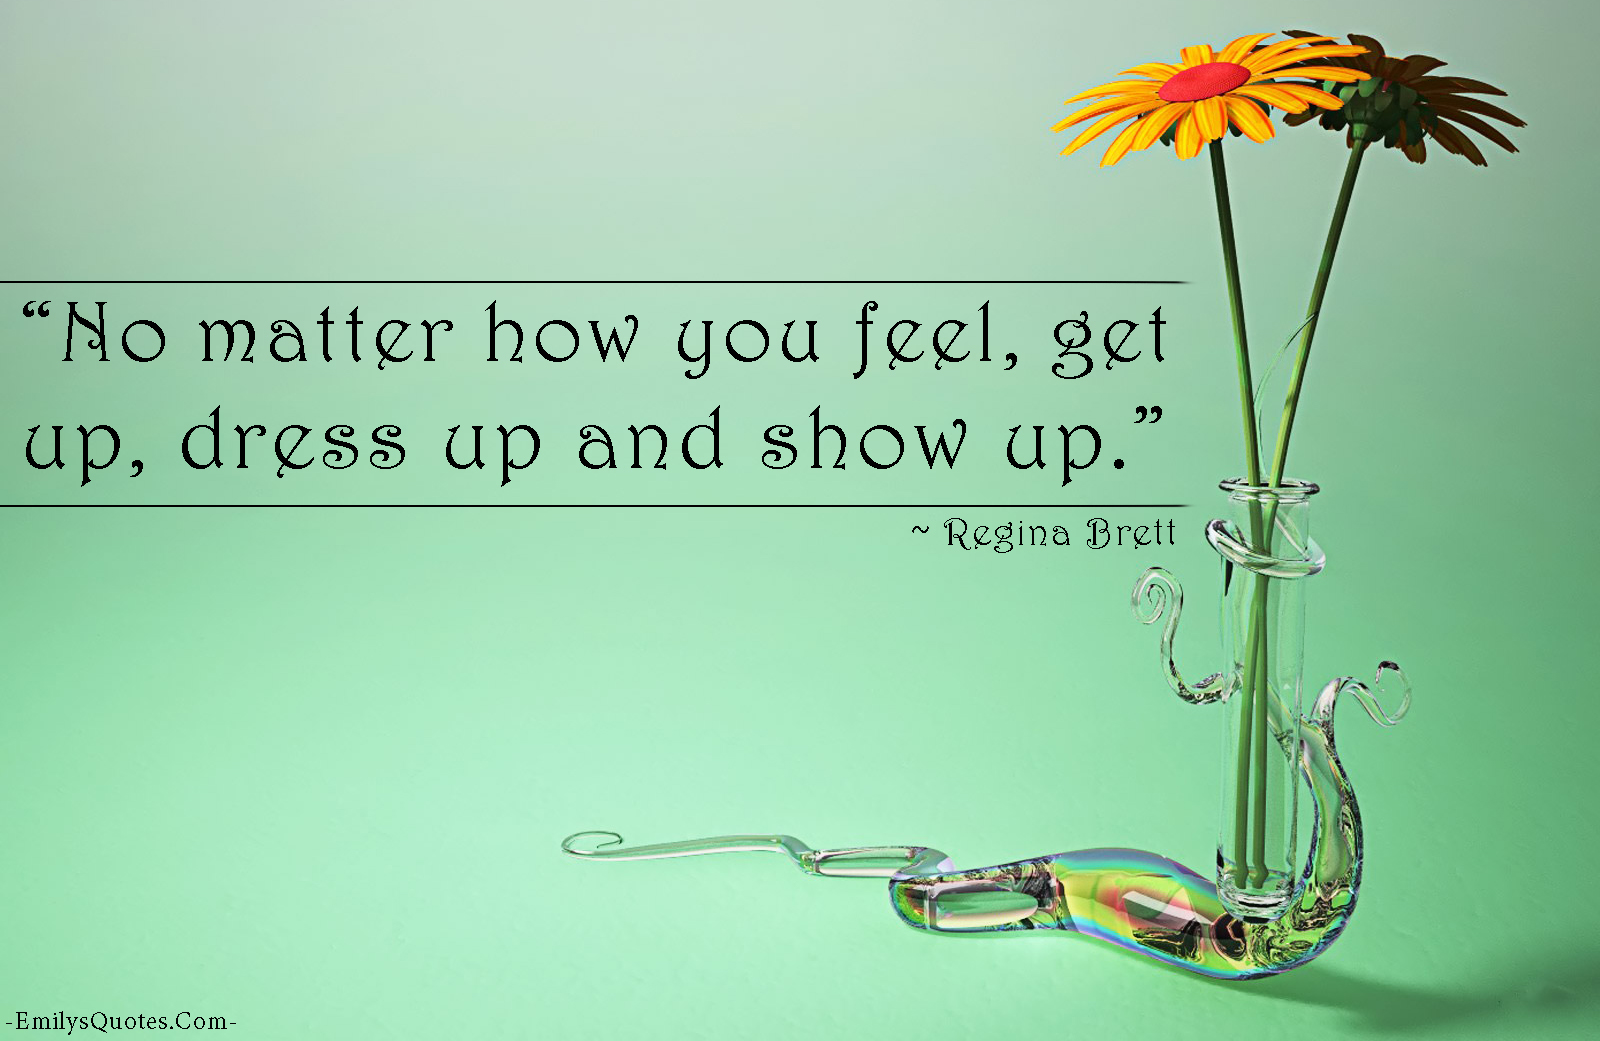 No matter how you feel, get up, dress up and show up